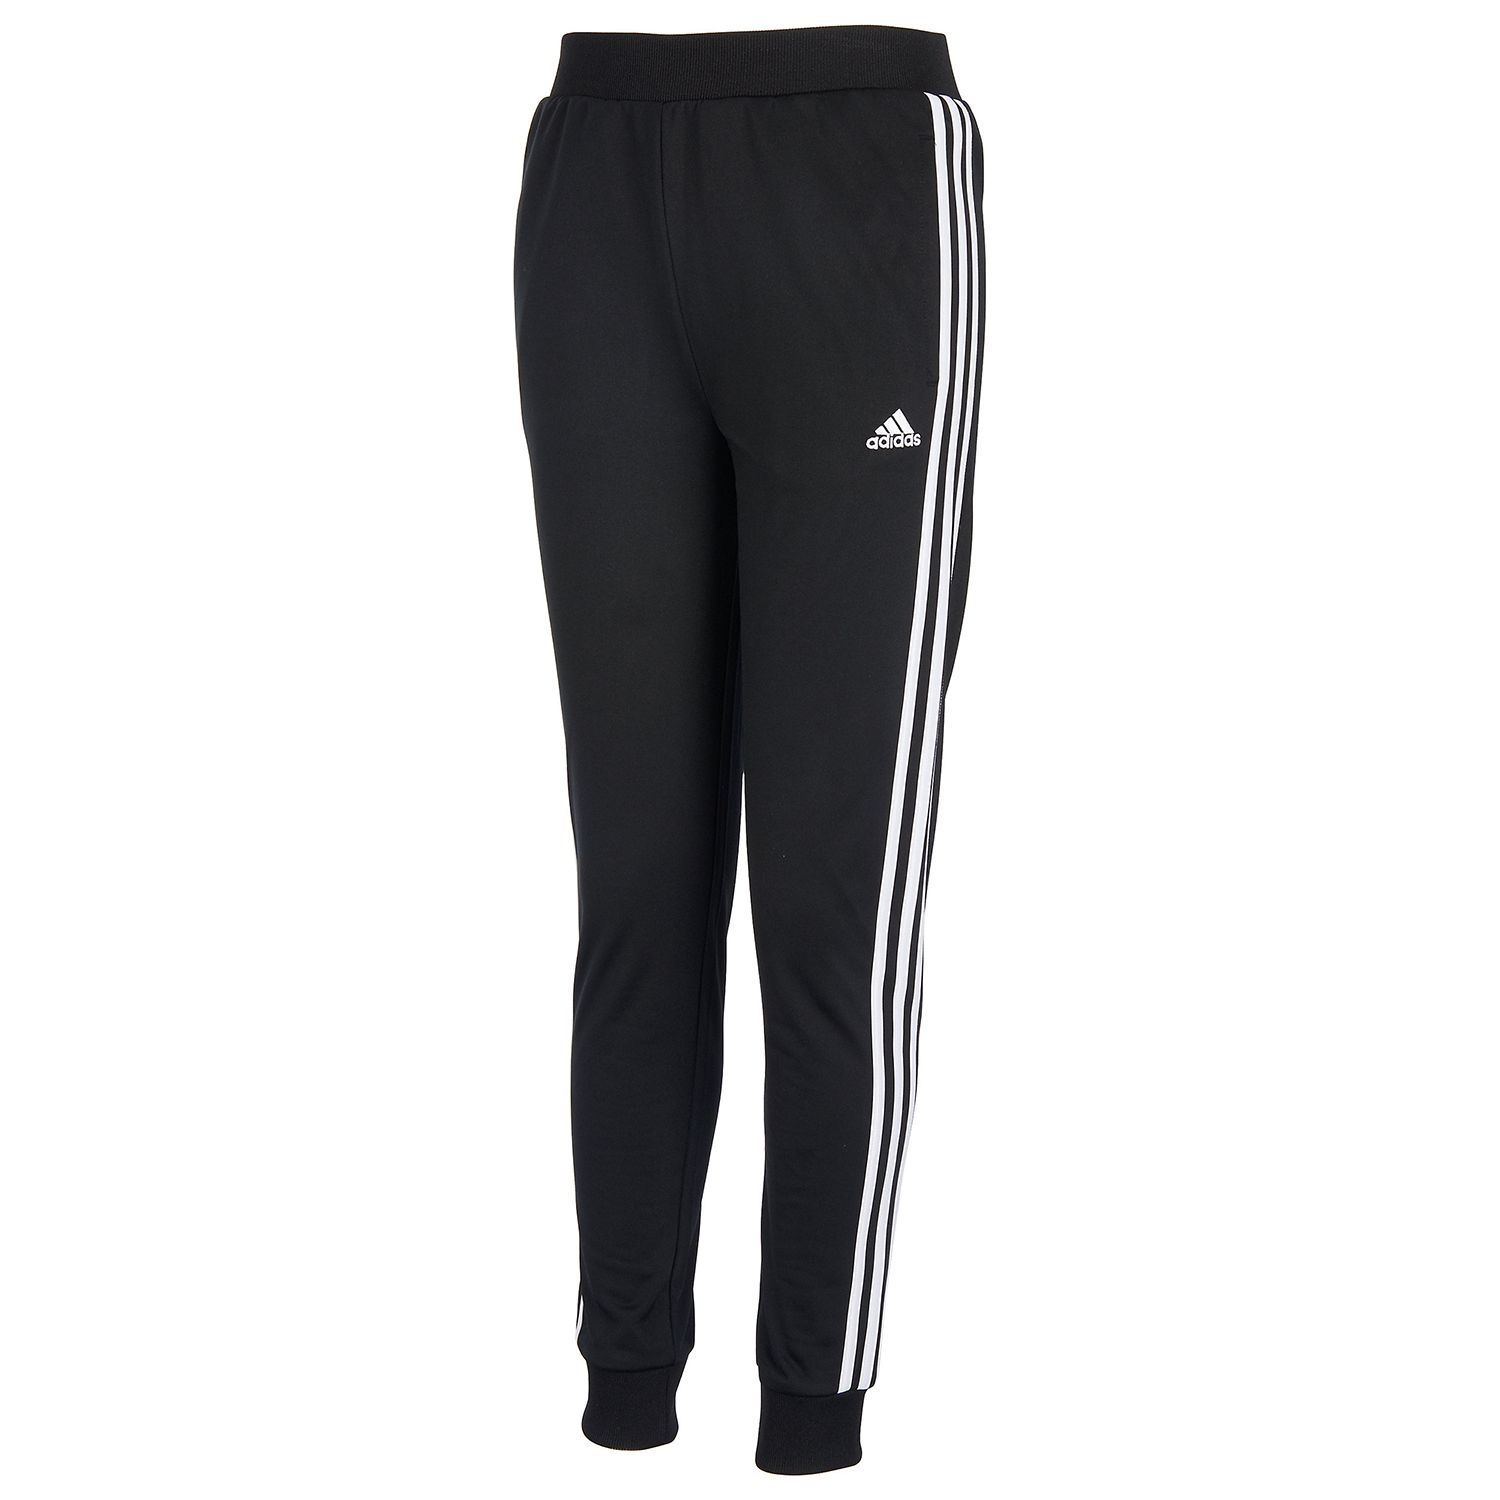 outfit jogging adidas